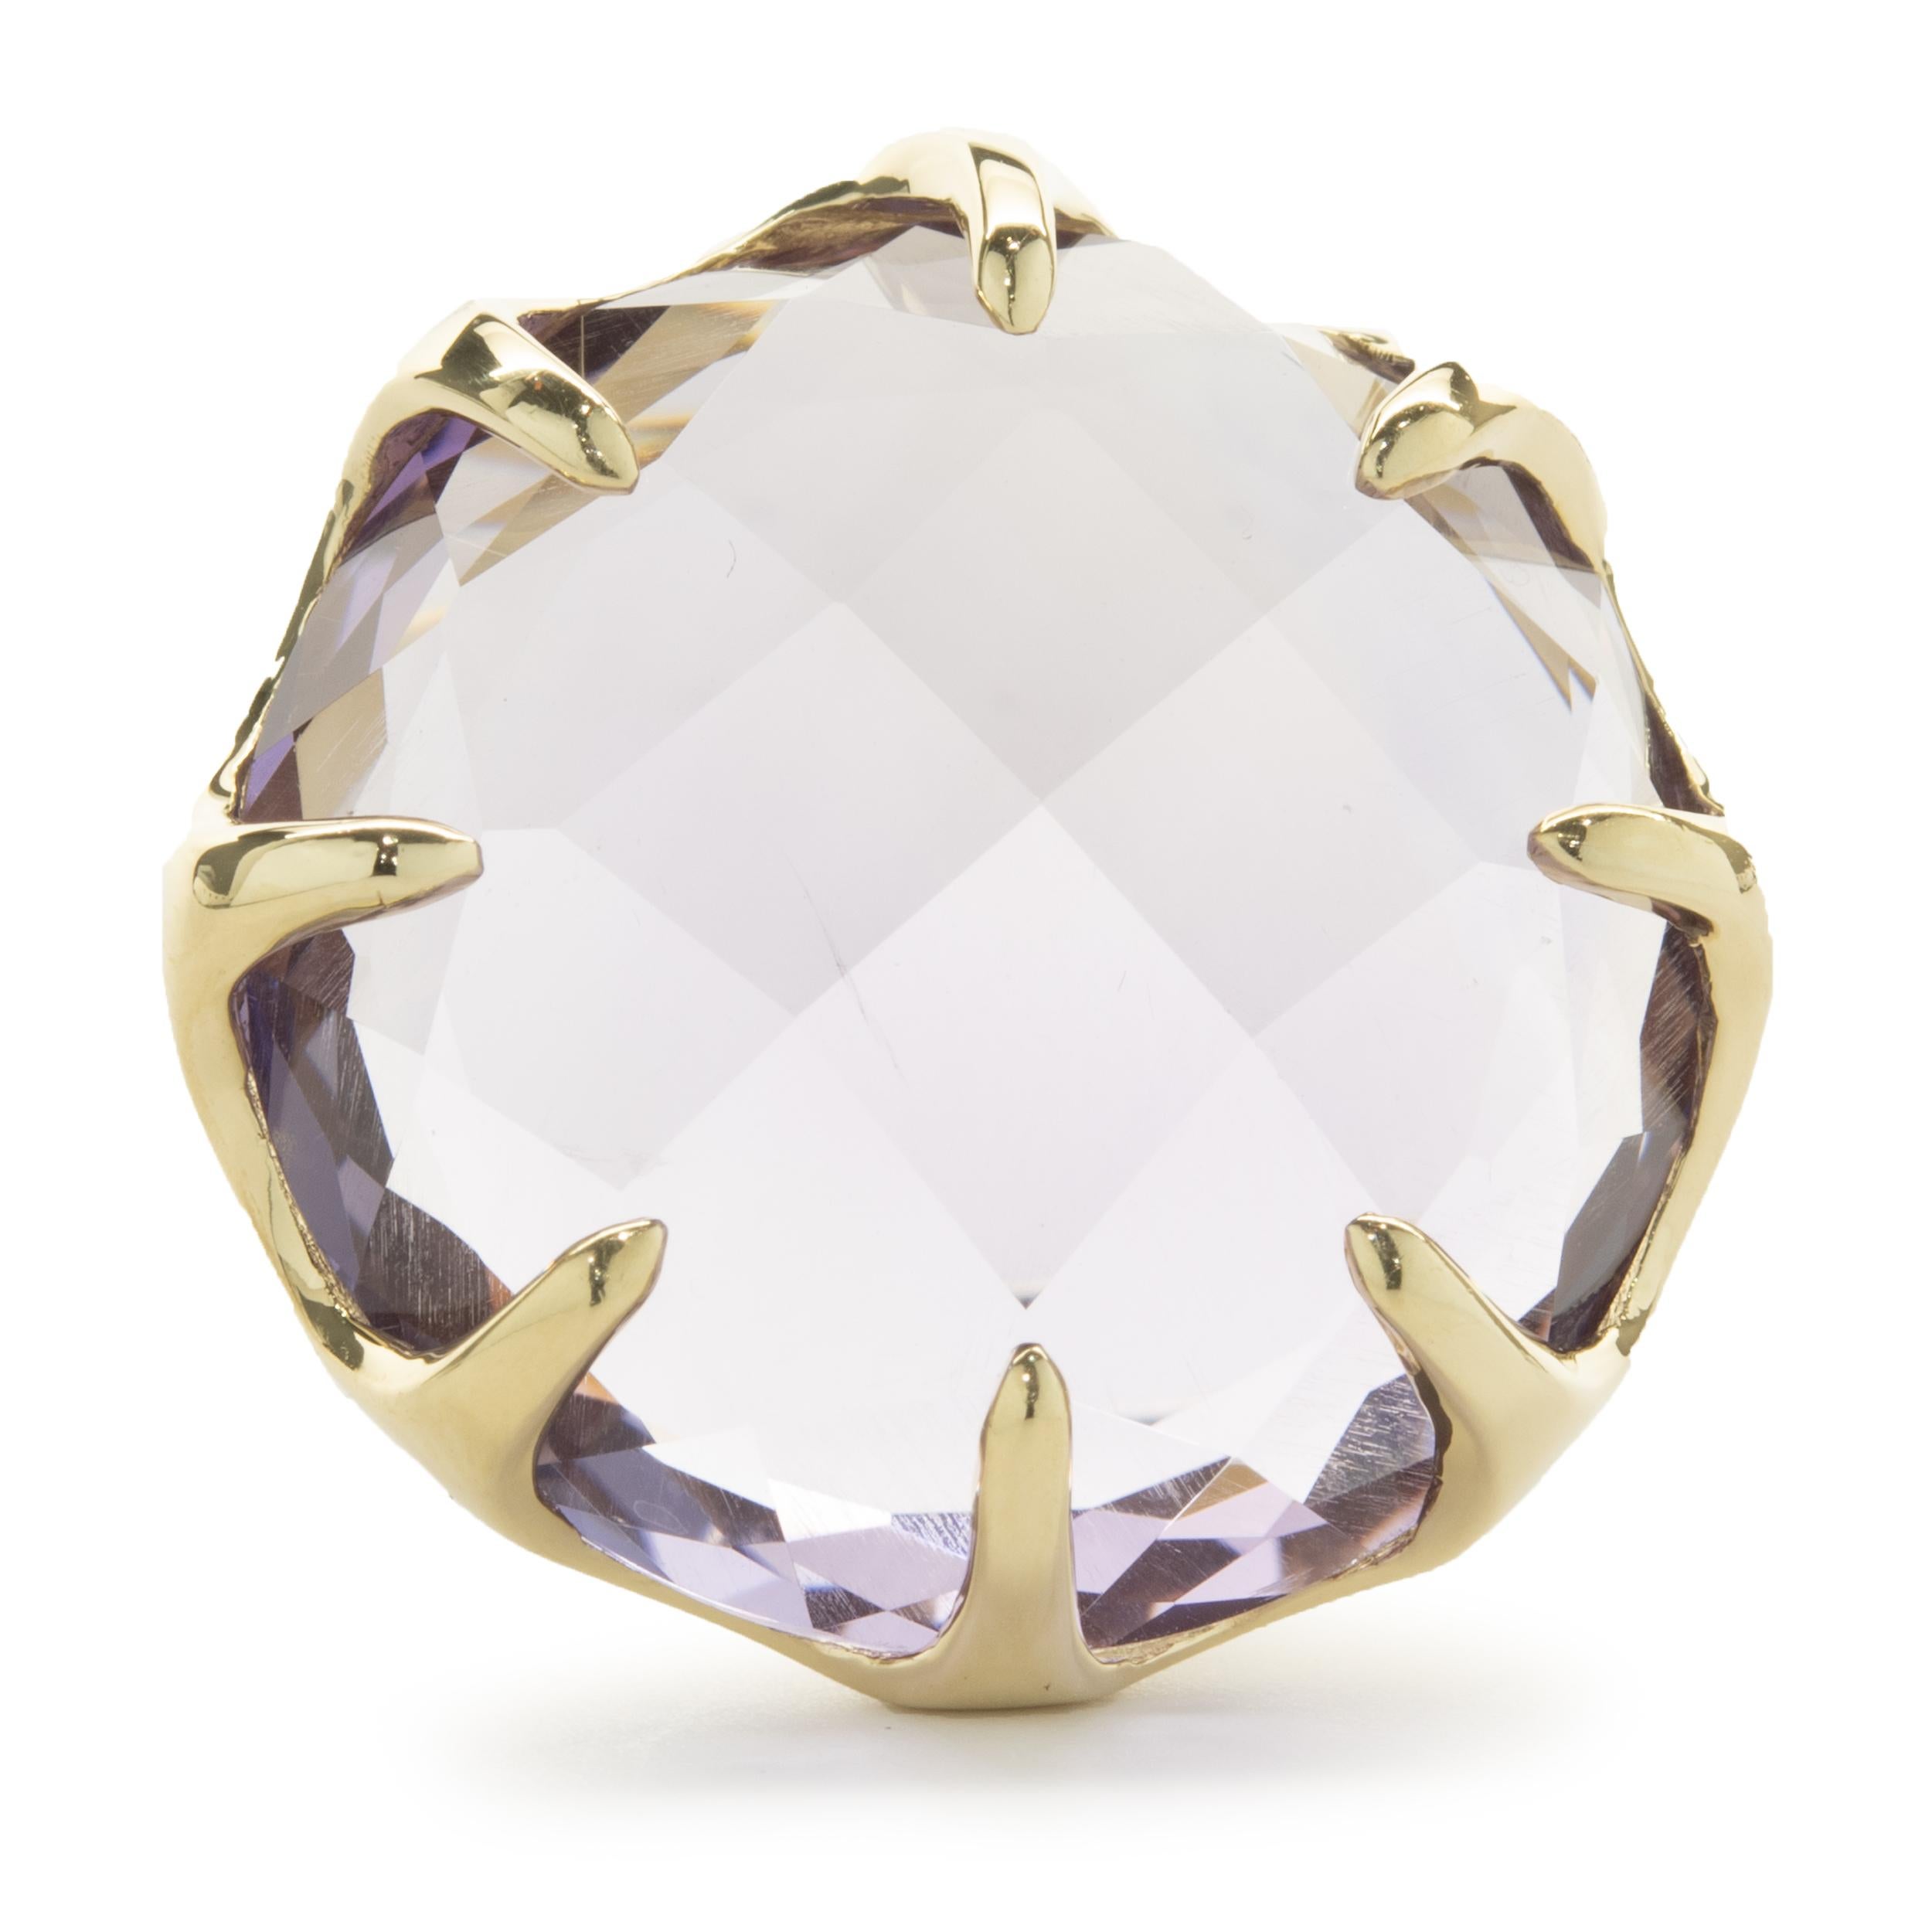 Designer: Ippolita
Material: 18K yellow gold
Weight: 18.95 grams
Dimensions: ring top measures 26.5mm wide
Size: 9 (please allow 2 additional days for sizing)
